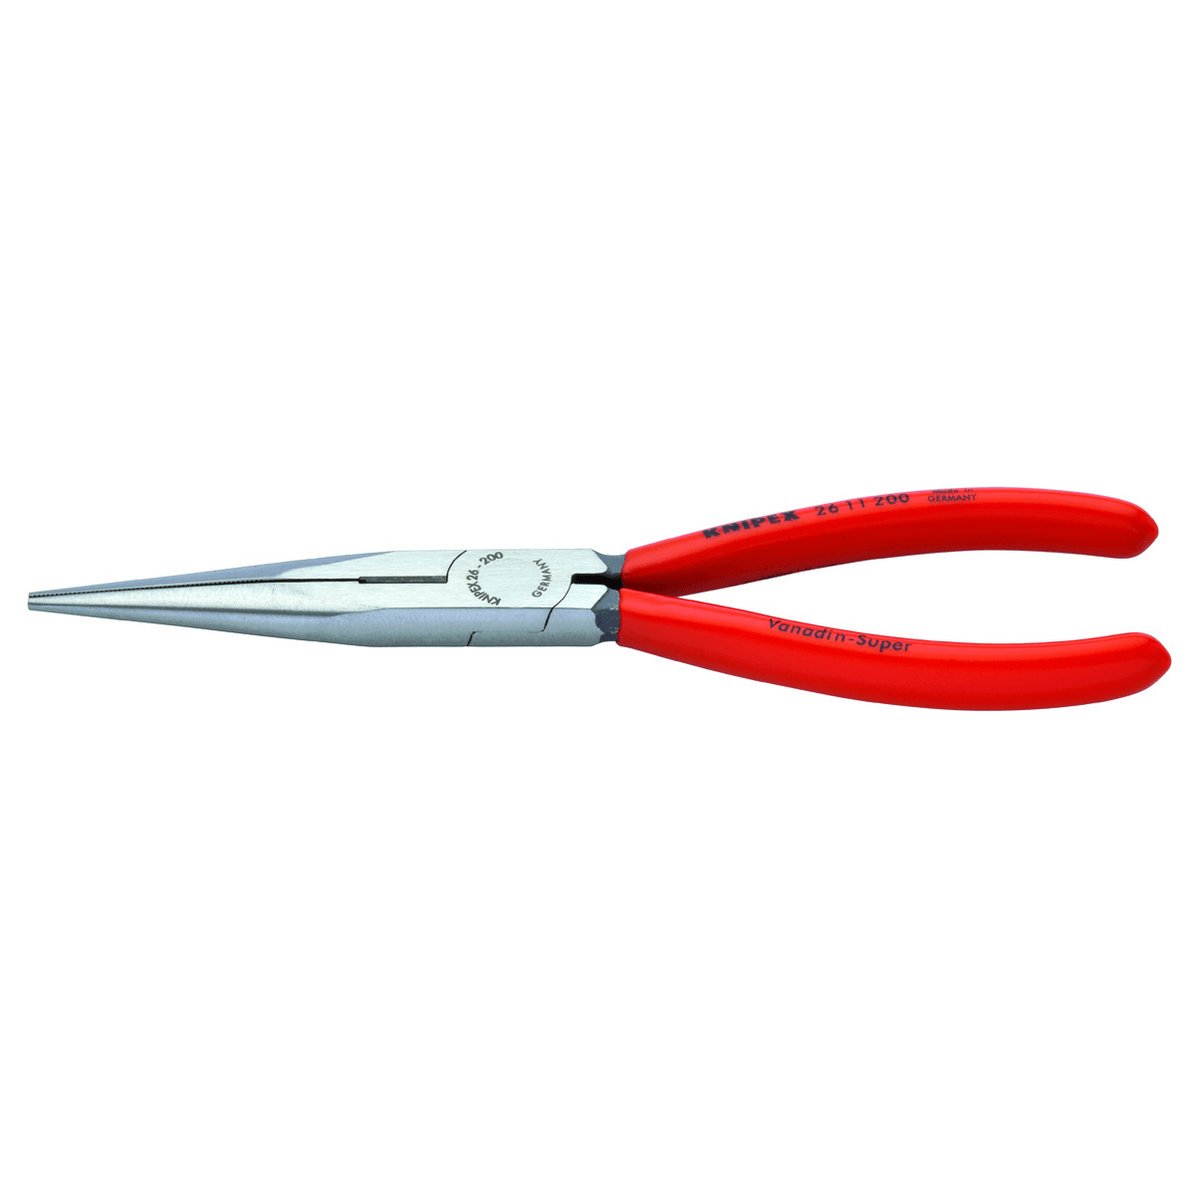 Knipex 2611200 - 8" Snipe Nose Side Cutting Pliers